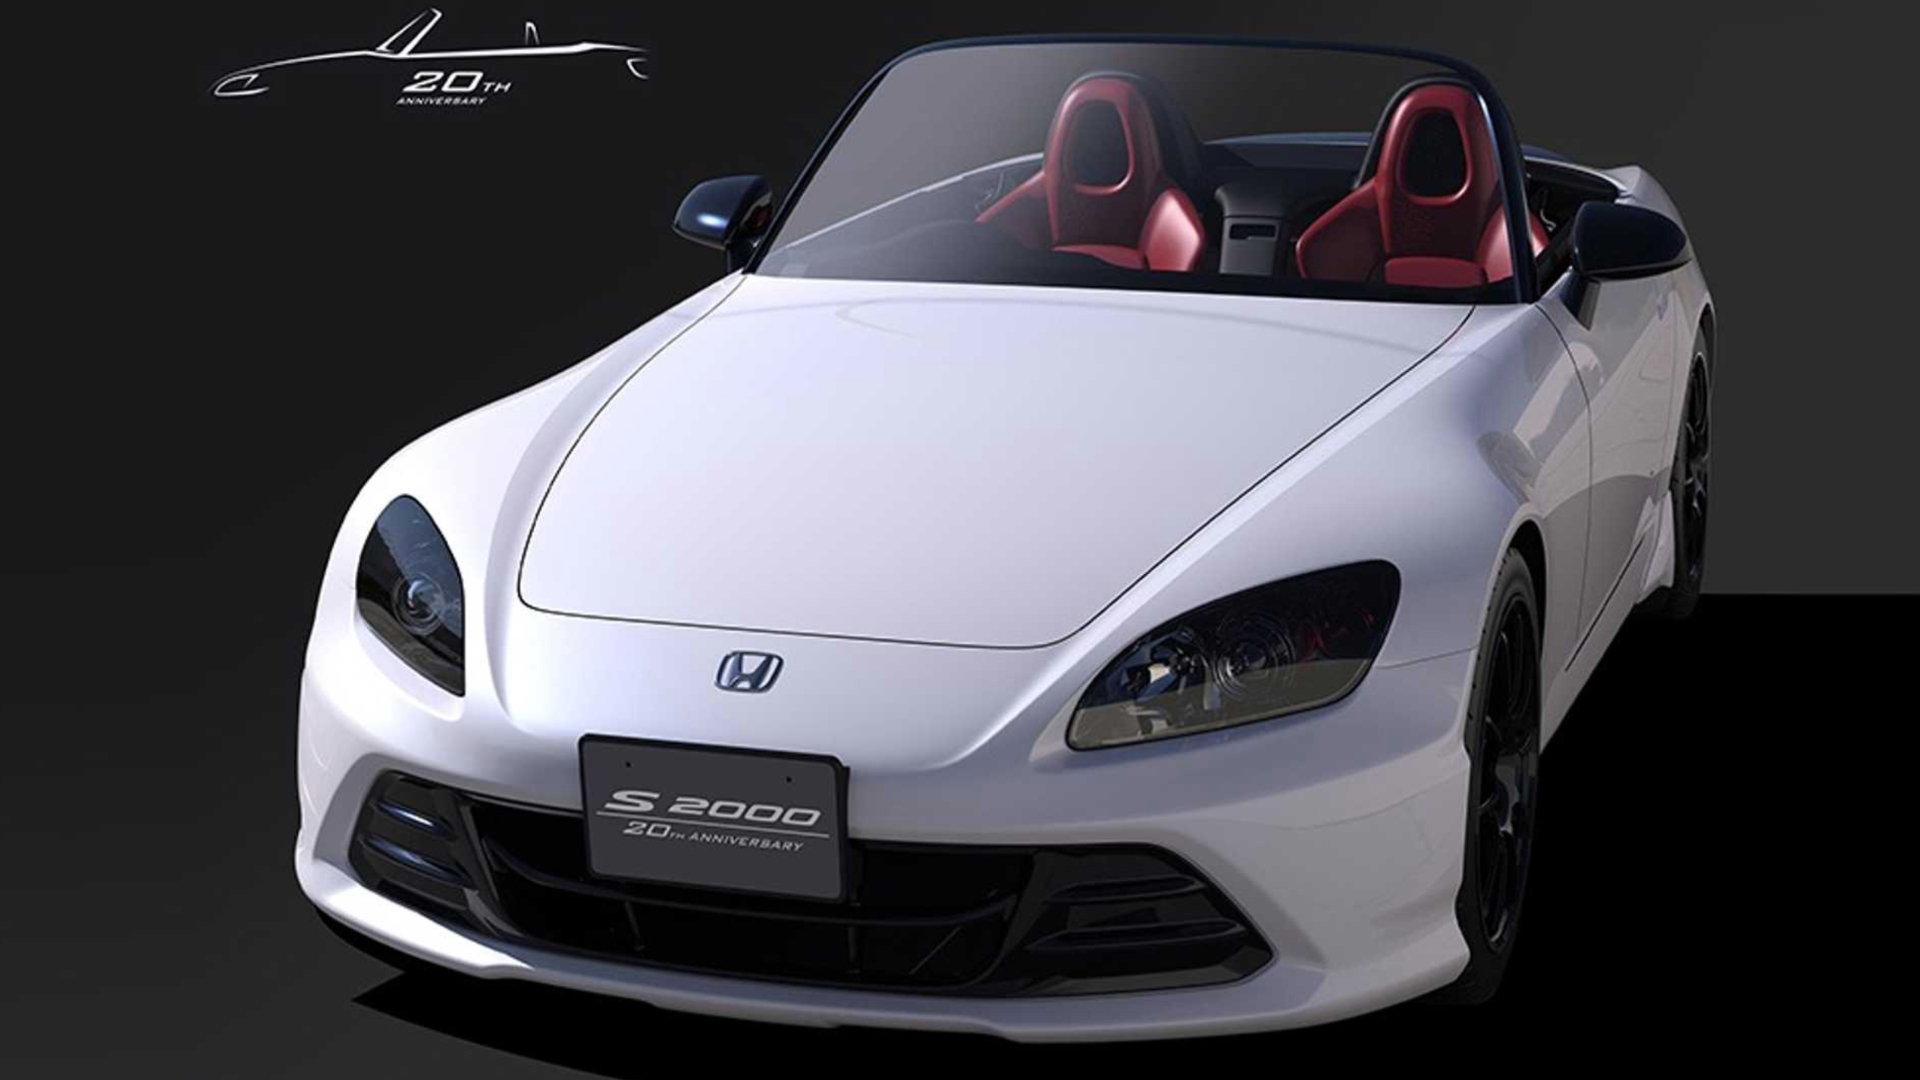 Honda to remanufacture S2000 parts